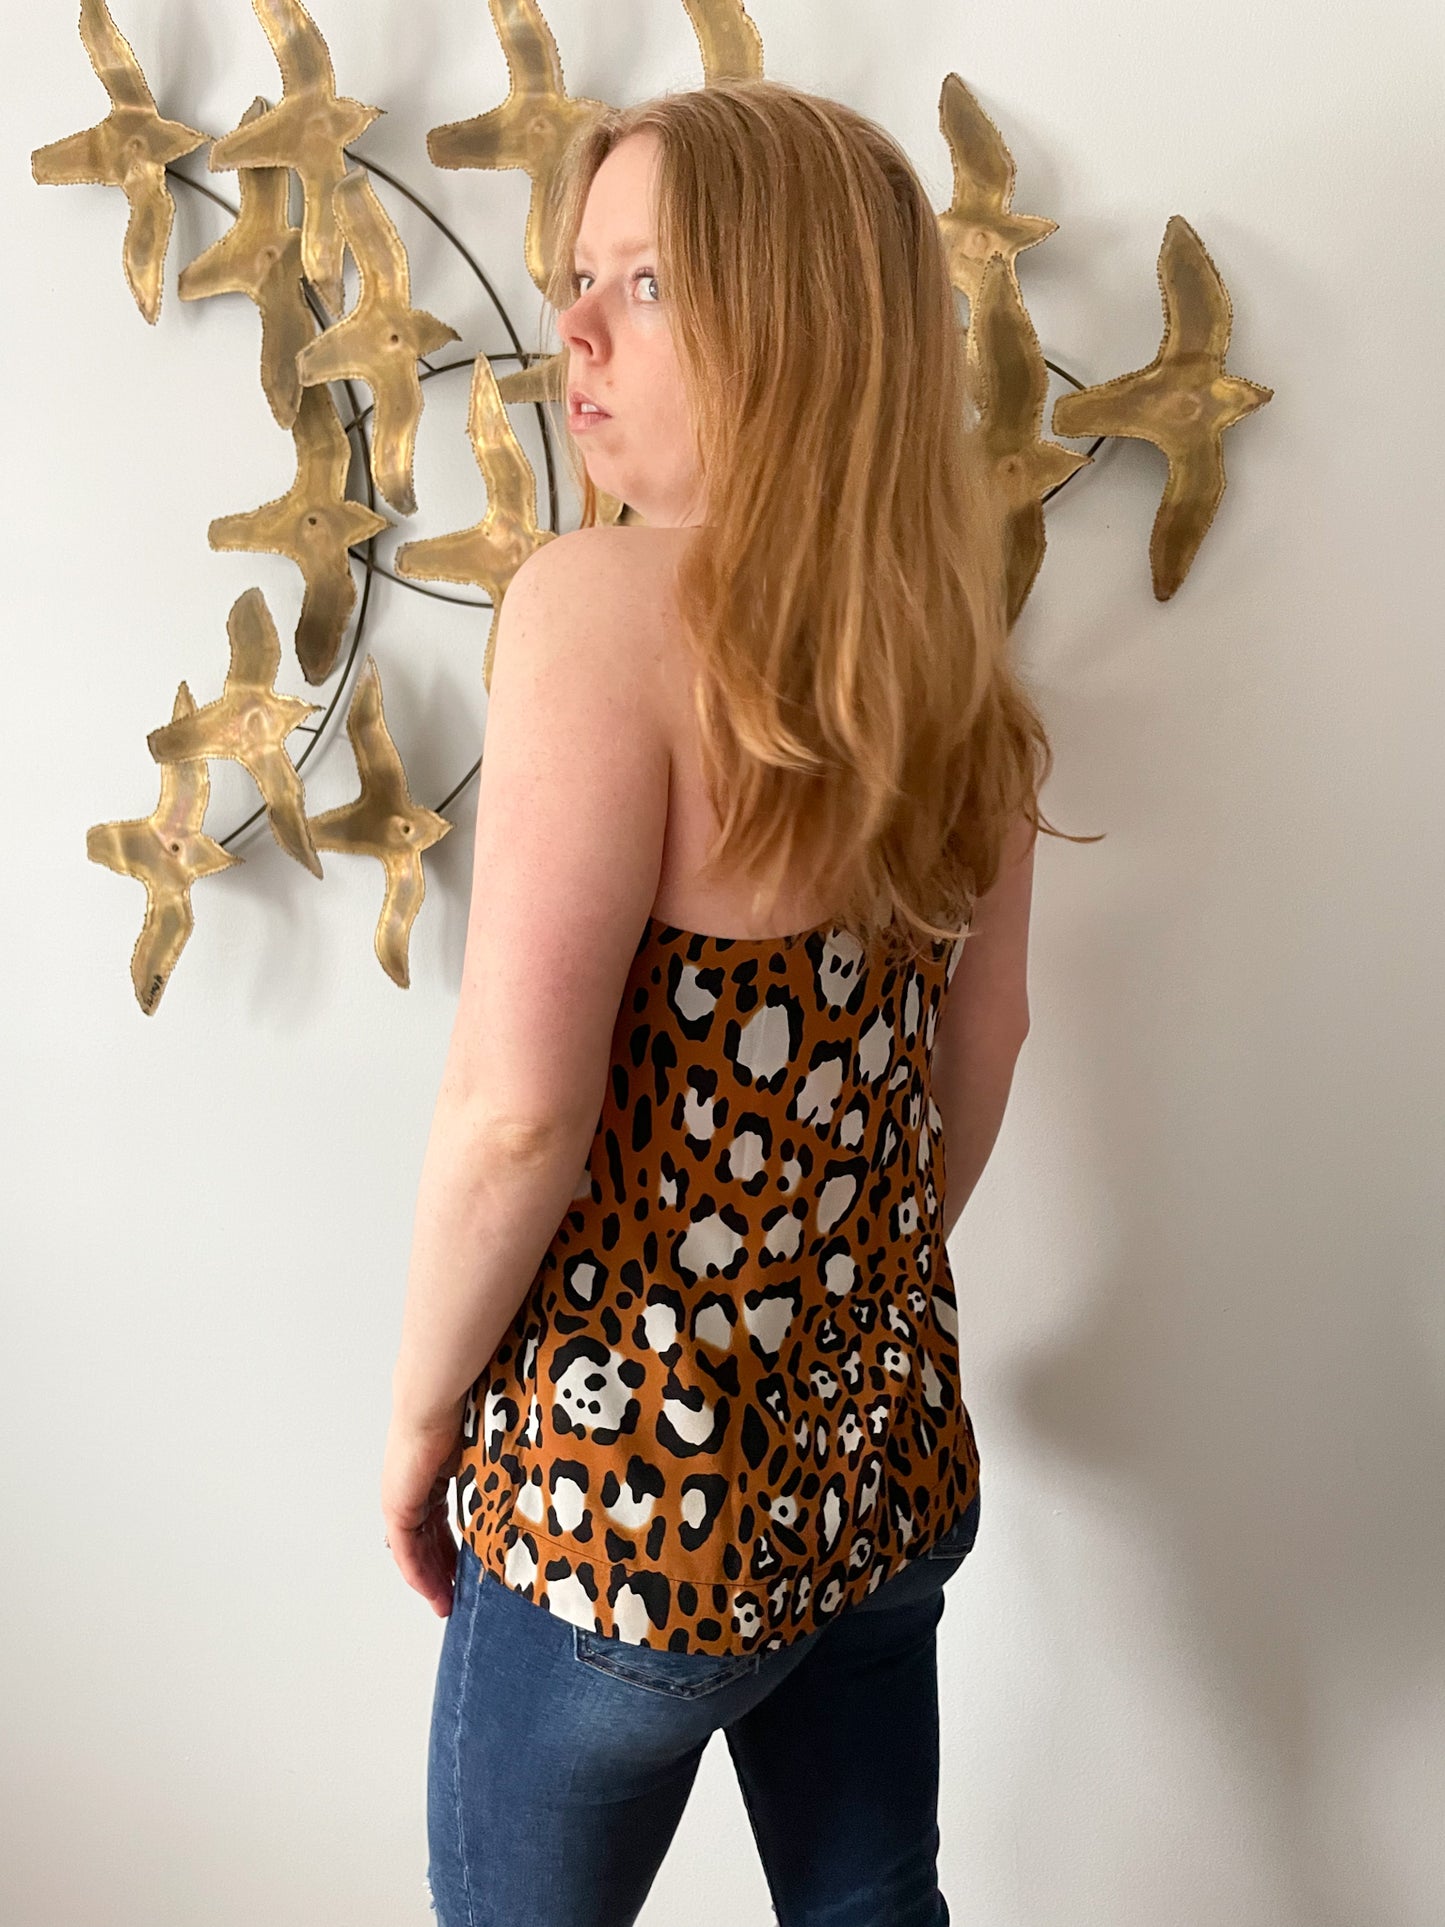 Topshop Tall Leopard Sleeveless Top - Size 4 (S)